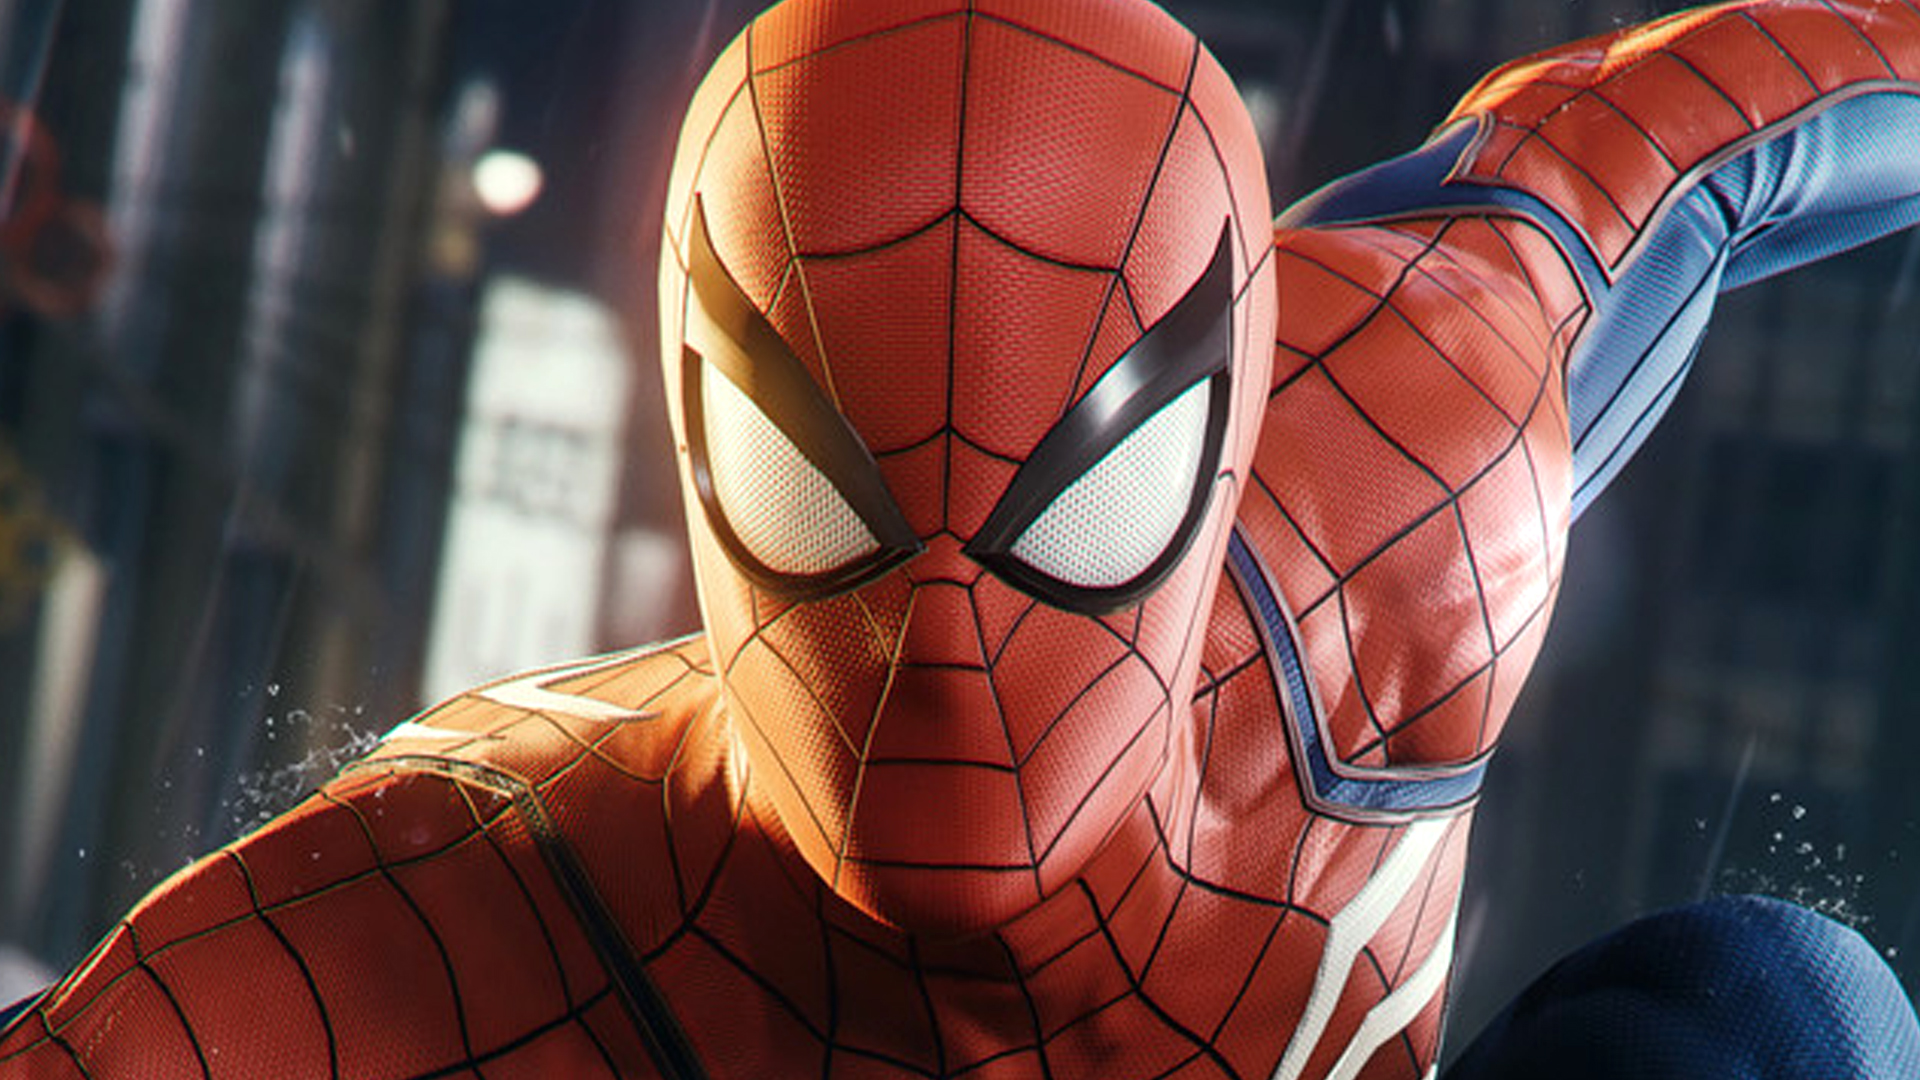 Spider-Man Steam pre-order customers may need to get a refund